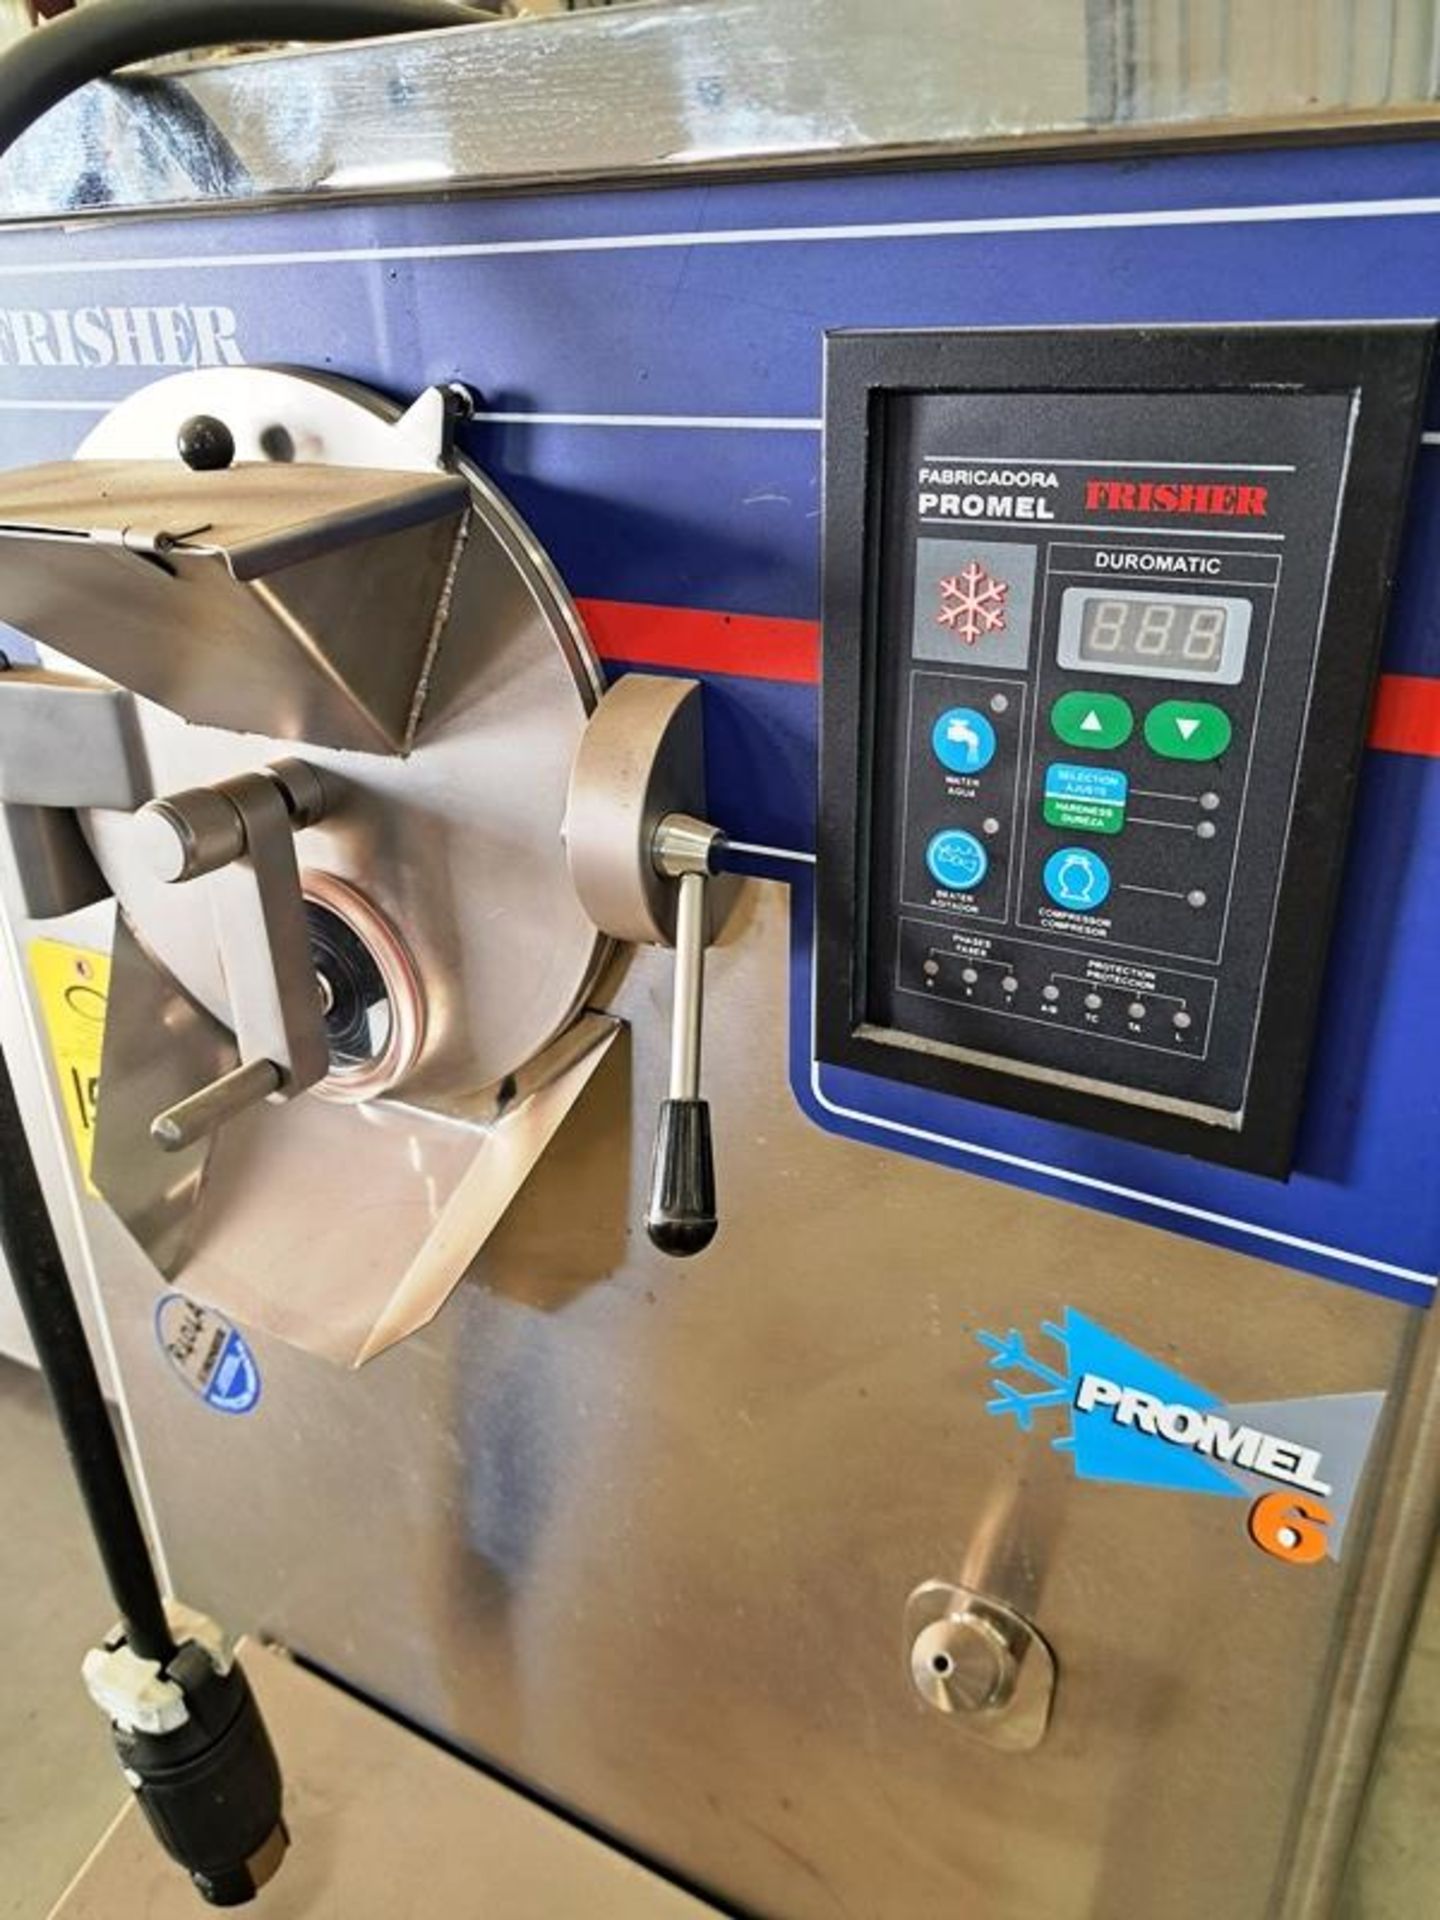 Frisher Promel 6 Ice Cream Dispenser, Ser. #4724, 5 h.p., 220 volts, 3 phase (Required Loading - Image 2 of 4